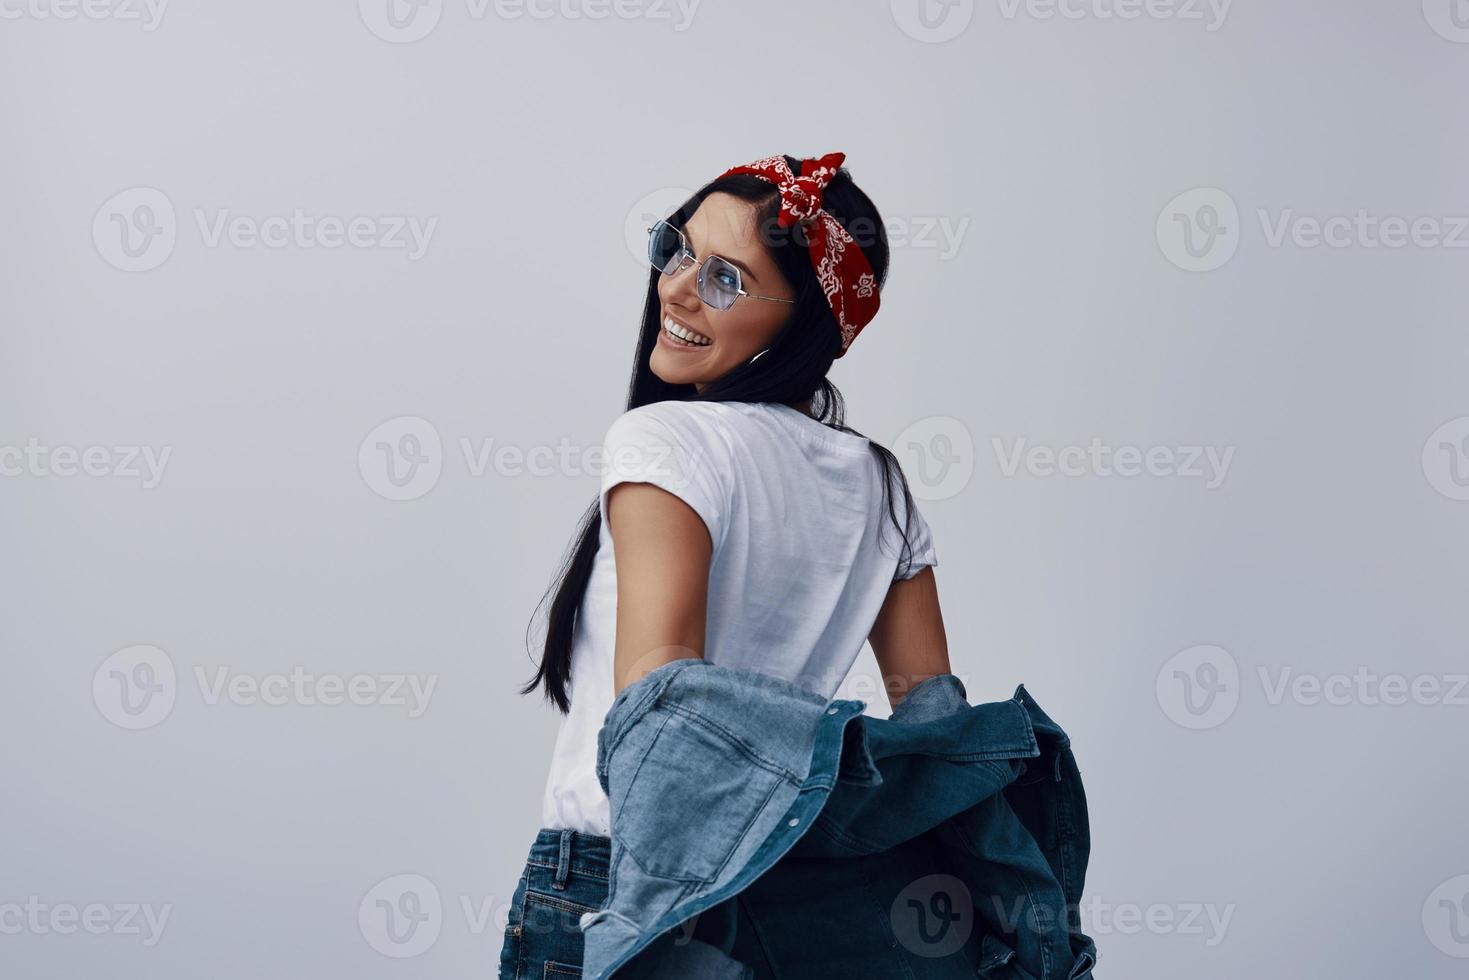 Fashionable young woman in bandana looking away and smiling photo